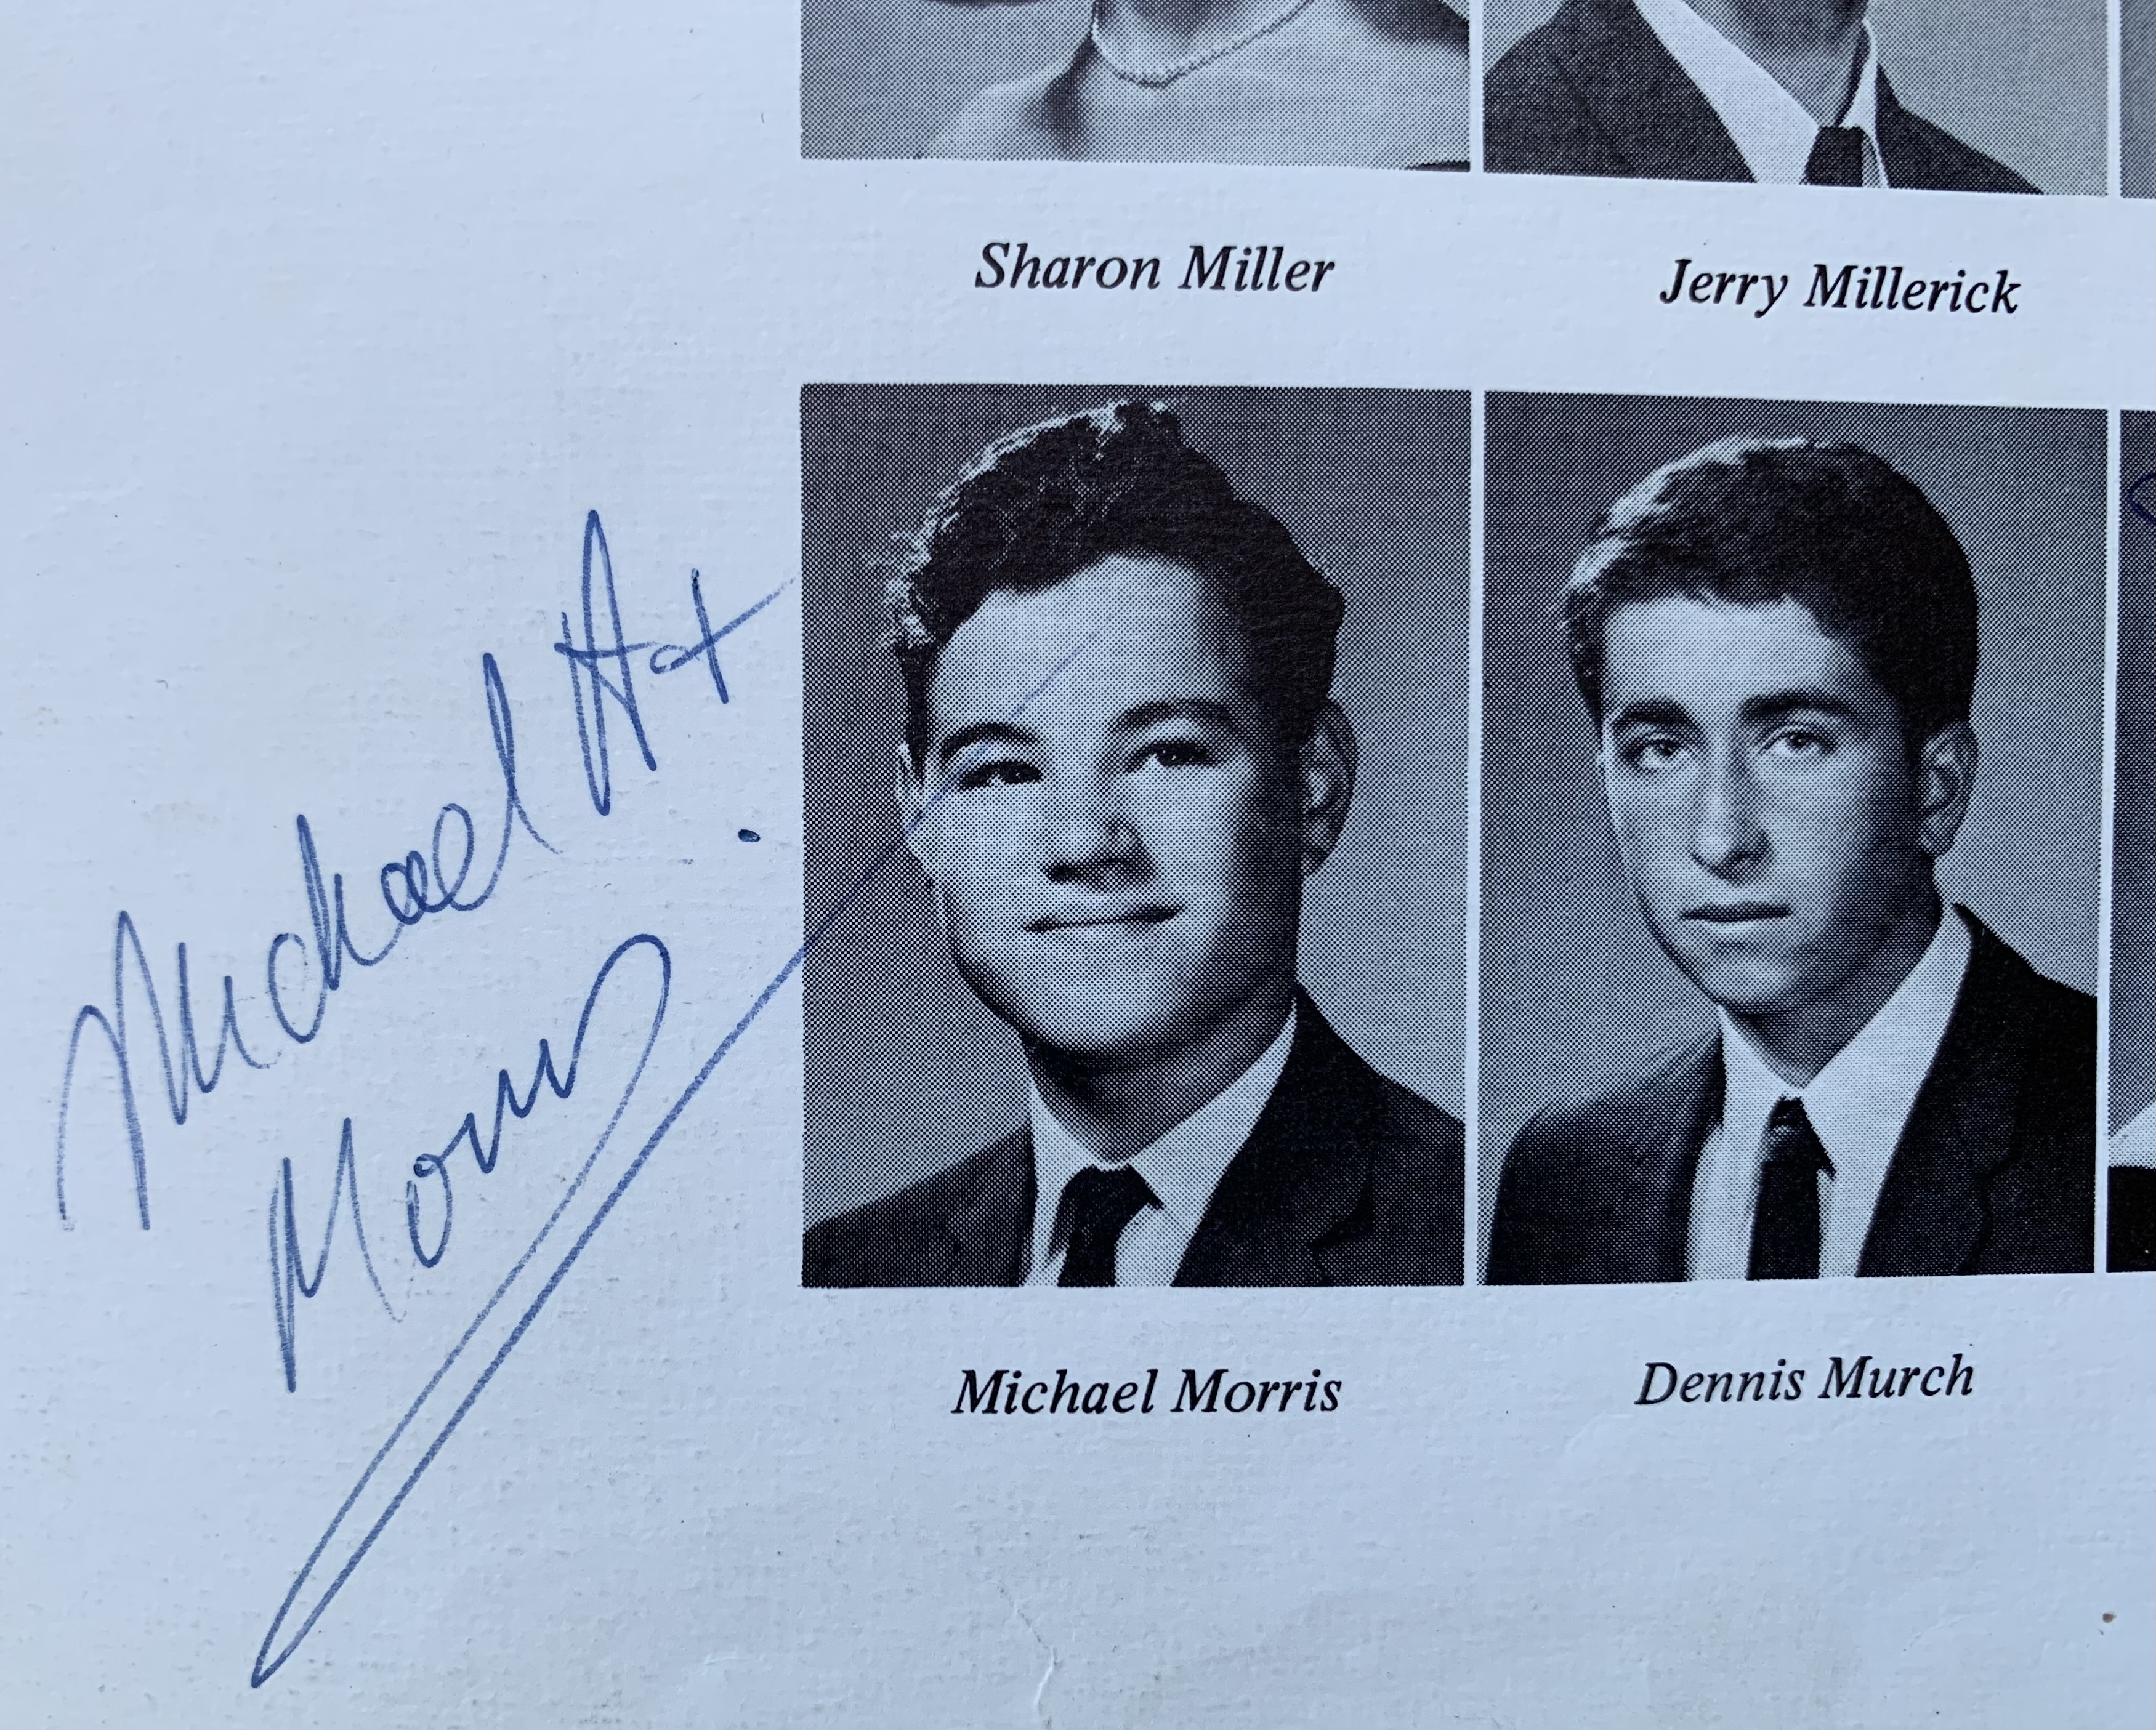 Michael A+ Morris, from the 1968 Analy High School yearbook. Yes, he was an A+ student.